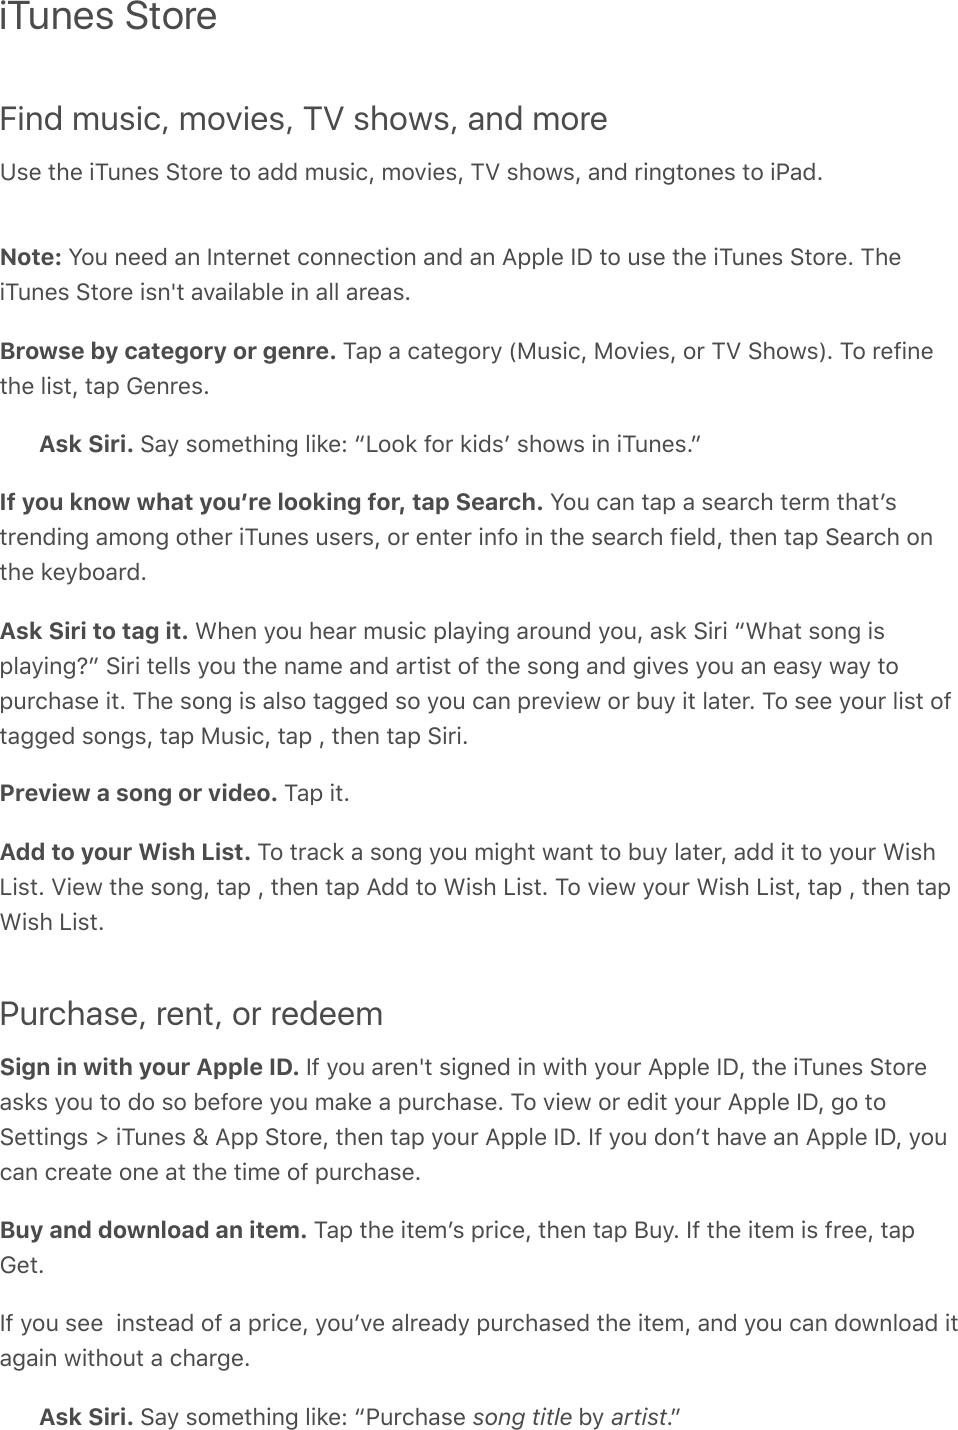 iTunes StoreFind music, movies, TV shows, and moreZ&amp;(%&quot;*(%.M&gt;0(&amp;%!&quot;2$(%&quot;2%#77%/&gt;&amp;.)L%/2D.(&amp;L%MT%&amp;*21&amp;L%#07%$.0;&quot;20(&amp;%&quot;2%.@#7ENote: Y2&gt;%0((7%#0%S0&quot;($0(&quot;%)200()&quot;.20%#07%#0%?--3(%SP%&quot;2%&gt;&amp;(%&quot;*(%.M&gt;0(&amp;%!&quot;2$(E%M*(.M&gt;0(&amp;%!&quot;2$(%.&amp;0p&quot;%#D#.3#53(%.0%#33%#$(#&amp;EBrowse by category or genre. M#-%#%)#&quot;(;2$=%W8&gt;&amp;.)L%82D.(&amp;L%2$%MT%!*21&amp;XE%M2%$(9.0(&quot;*(%3.&amp;&quot;L%&quot;#-%6(0$(&amp;EAsk Siri. !#=%&amp;2/(&quot;*.0;%3.&apos;(O%_V22&apos;%92$%&apos;.7&amp;F%&amp;*21&amp;%.0%.M&gt;0(&amp;E`If you know what youʼre looking for, tap Search. Y2&gt;%)#0%&quot;#-%#%&amp;(#$)*%&quot;($/%&quot;*#&quot;F&amp;&quot;$(07.0;%#/20;%2&quot;*($%.M&gt;0(&amp;%&gt;&amp;($&amp;L%2$%(0&quot;($%.092%.0%&quot;*(%&amp;(#$)*%9.(37L%&quot;*(0%&quot;#-%!(#$)*%20&quot;*(%&apos;(=52#$7EAsk Siri to tag it. &lt;*(0%=2&gt;%*(#$%/&gt;&amp;.)%-3#=.0;%#$2&gt;07%=2&gt;L%#&amp;&apos;%!.$.%_&lt;*#&quot;%&amp;20;%.&amp;-3#=.0;n`%!.$.%&quot;(33&amp;%=2&gt;%&quot;*(%0#/(%#07%#$&quot;.&amp;&quot;%29%&quot;*(%&amp;20;%#07%;.D(&amp;%=2&gt;%#0%(#&amp;=%1#=%&quot;2-&gt;$)*#&amp;(%.&quot;E%M*(%&amp;20;%.&amp;%#3&amp;2%&quot;#;;(7%&amp;2%=2&gt;%)#0%-$(D.(1%2$%5&gt;=%.&quot;%3#&quot;($E%M2%&amp;((%=2&gt;$%3.&amp;&quot;%29&quot;#;;(7%&amp;20;&amp;L%&quot;#-%8&gt;&amp;.)L%&quot;#-%L%&quot;*(0%&quot;#-%!.$.EPreview a song or video. M#-%.&quot;EAdd to your Wish List. M2%&quot;$#)&apos;%#%&amp;20;%=2&gt;%/.;*&quot;%1#0&quot;%&quot;2%5&gt;=%3#&quot;($L%#77%.&quot;%&quot;2%=2&gt;$%&lt;.&amp;*V.&amp;&quot;E%T.(1%&quot;*(%&amp;20;L%&quot;#-%L%&quot;*(0%&quot;#-%?77%&quot;2%&lt;.&amp;*%V.&amp;&quot;E%M2%D.(1%=2&gt;$%&lt;.&amp;*%V.&amp;&quot;L%&quot;#-%L%&quot;*(0%&quot;#-&lt;.&amp;*%V.&amp;&quot;EPurchase, rent, or redeemSign in with your Apple ID. S9%=2&gt;%#$(0p&quot;%&amp;.;0(7%.0%1.&quot;*%=2&gt;$%?--3(%SPL%&quot;*(%.M&gt;0(&amp;%!&quot;2$(#&amp;&apos;&amp;%=2&gt;%&quot;2%72%&amp;2%5(92$(%=2&gt;%/#&apos;(%#%-&gt;$)*#&amp;(E%M2%D.(1%2$%(7.&quot;%=2&gt;$%?--3(%SPL%;2%&quot;2!(&quot;&quot;.0;&amp;%[%.M&gt;0(&amp;%\%?--%!&quot;2$(L%&quot;*(0%&quot;#-%=2&gt;$%?--3(%SPE%S9%=2&gt;%720F&quot;%*#D(%#0%?--3(%SPL%=2&gt;)#0%)$(#&quot;(%20(%#&quot;%&quot;*(%&quot;./(%29%-&gt;$)*#&amp;(EBuy and download an item. M#-%&quot;*(%.&quot;(/F&amp;%-$.)(L%&quot;*(0%&quot;#-%J&gt;=E%S9%&quot;*(%.&quot;(/%.&amp;%9$((L%&quot;#-6(&quot;ES9%=2&gt;%&amp;((%%.0&amp;&quot;(#7%29%#%-$.)(L%=2&gt;FD(%#3$(#7=%-&gt;$)*#&amp;(7%&quot;*(%.&quot;(/L%#07%=2&gt;%)#0%721032#7%.&quot;#;#.0%1.&quot;*2&gt;&quot;%#%)*#$;(EAsk Siri. !#=%&amp;2/(&quot;*.0;%3.&apos;(O%_@&gt;$)*#&amp;(%song title%5=%artistE`